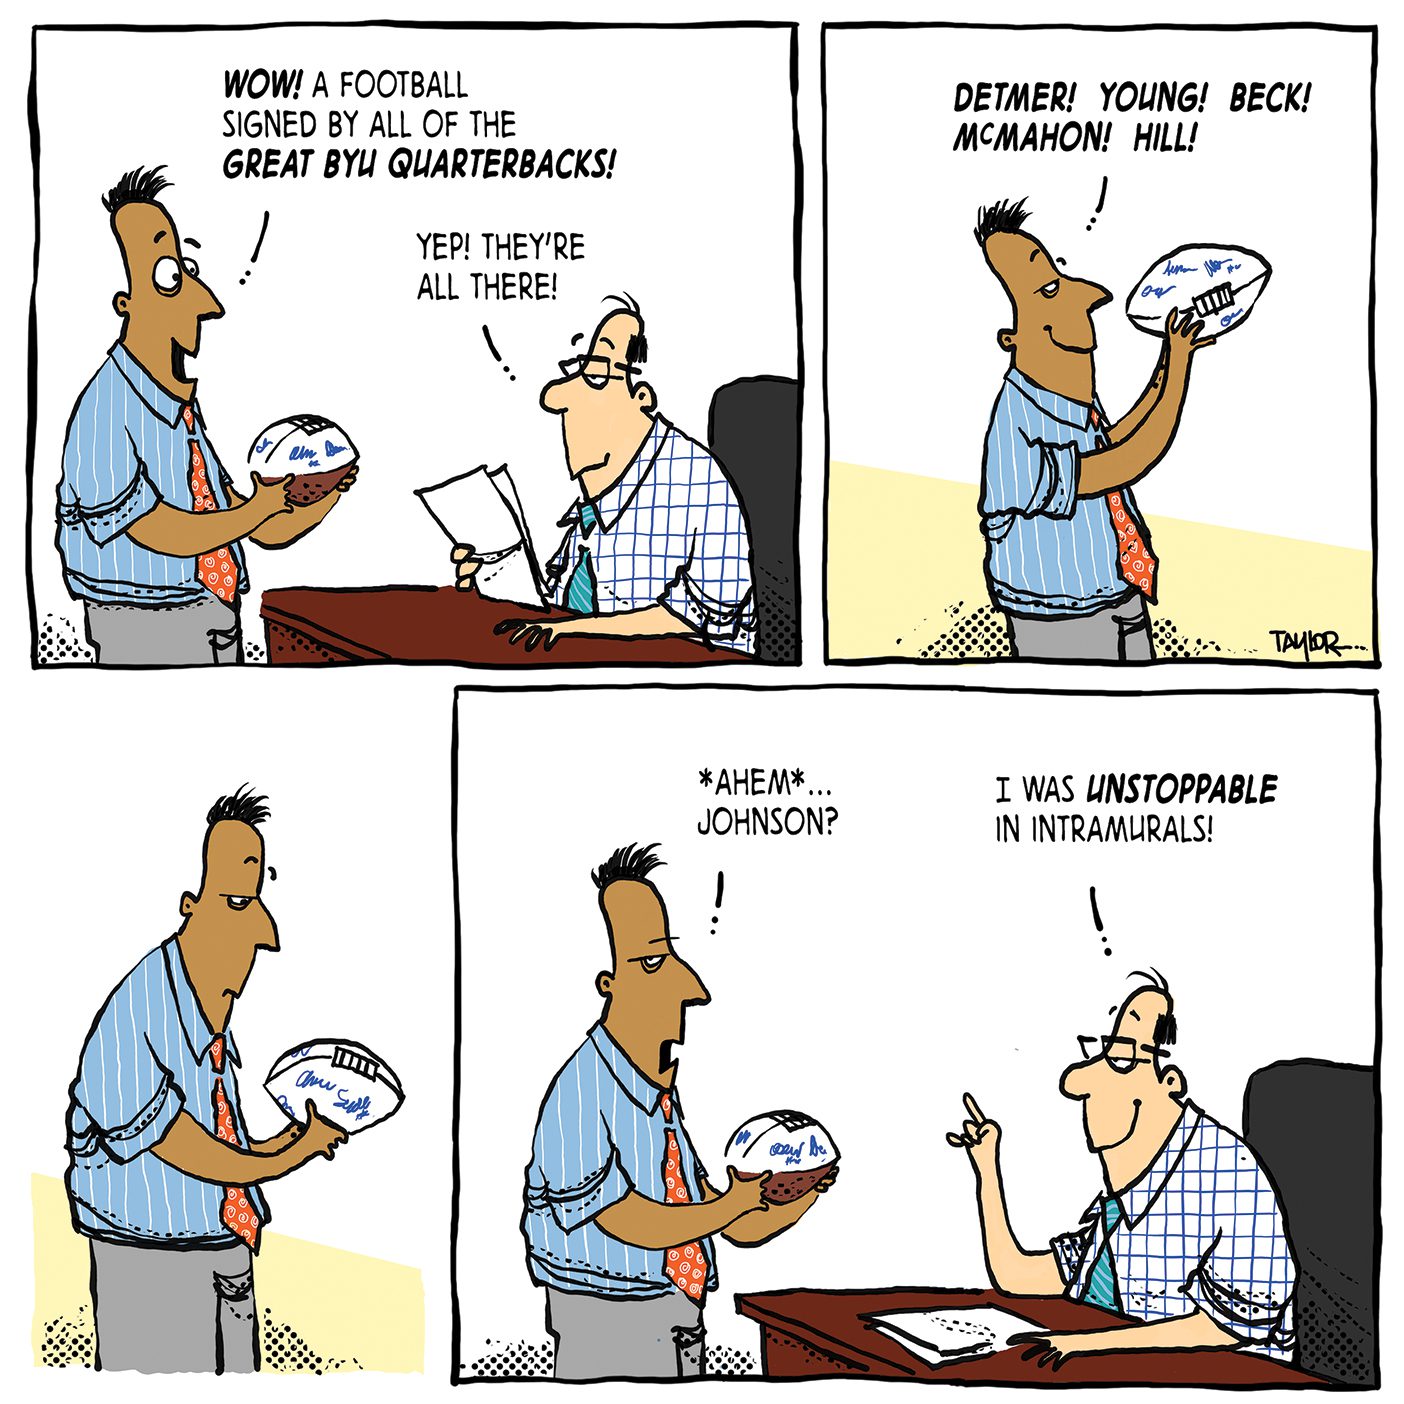 A 4 panel comic. The first panel shows an employee standing in front of his employer sitting at his desk. He has received a football as a gift and says, “WOWY, A football signed by all of the great BYU quarterbacks.” His boss calmly replies, “Yep, they’re all there.” The next panel shows the man looking closer at the football, and he begins to name the signatures, “Detmer, Young, Beck, McMahom, Hill!” The 3rd panel shows the man pause, frowning, and look confused at the football. The fourth panel shows him again in front of the desk looking up at his employer. It reads, “Ahem… Johnson?” The boss behind his desk has a coy smile and replies, “I was unstoppable in intramurals!”